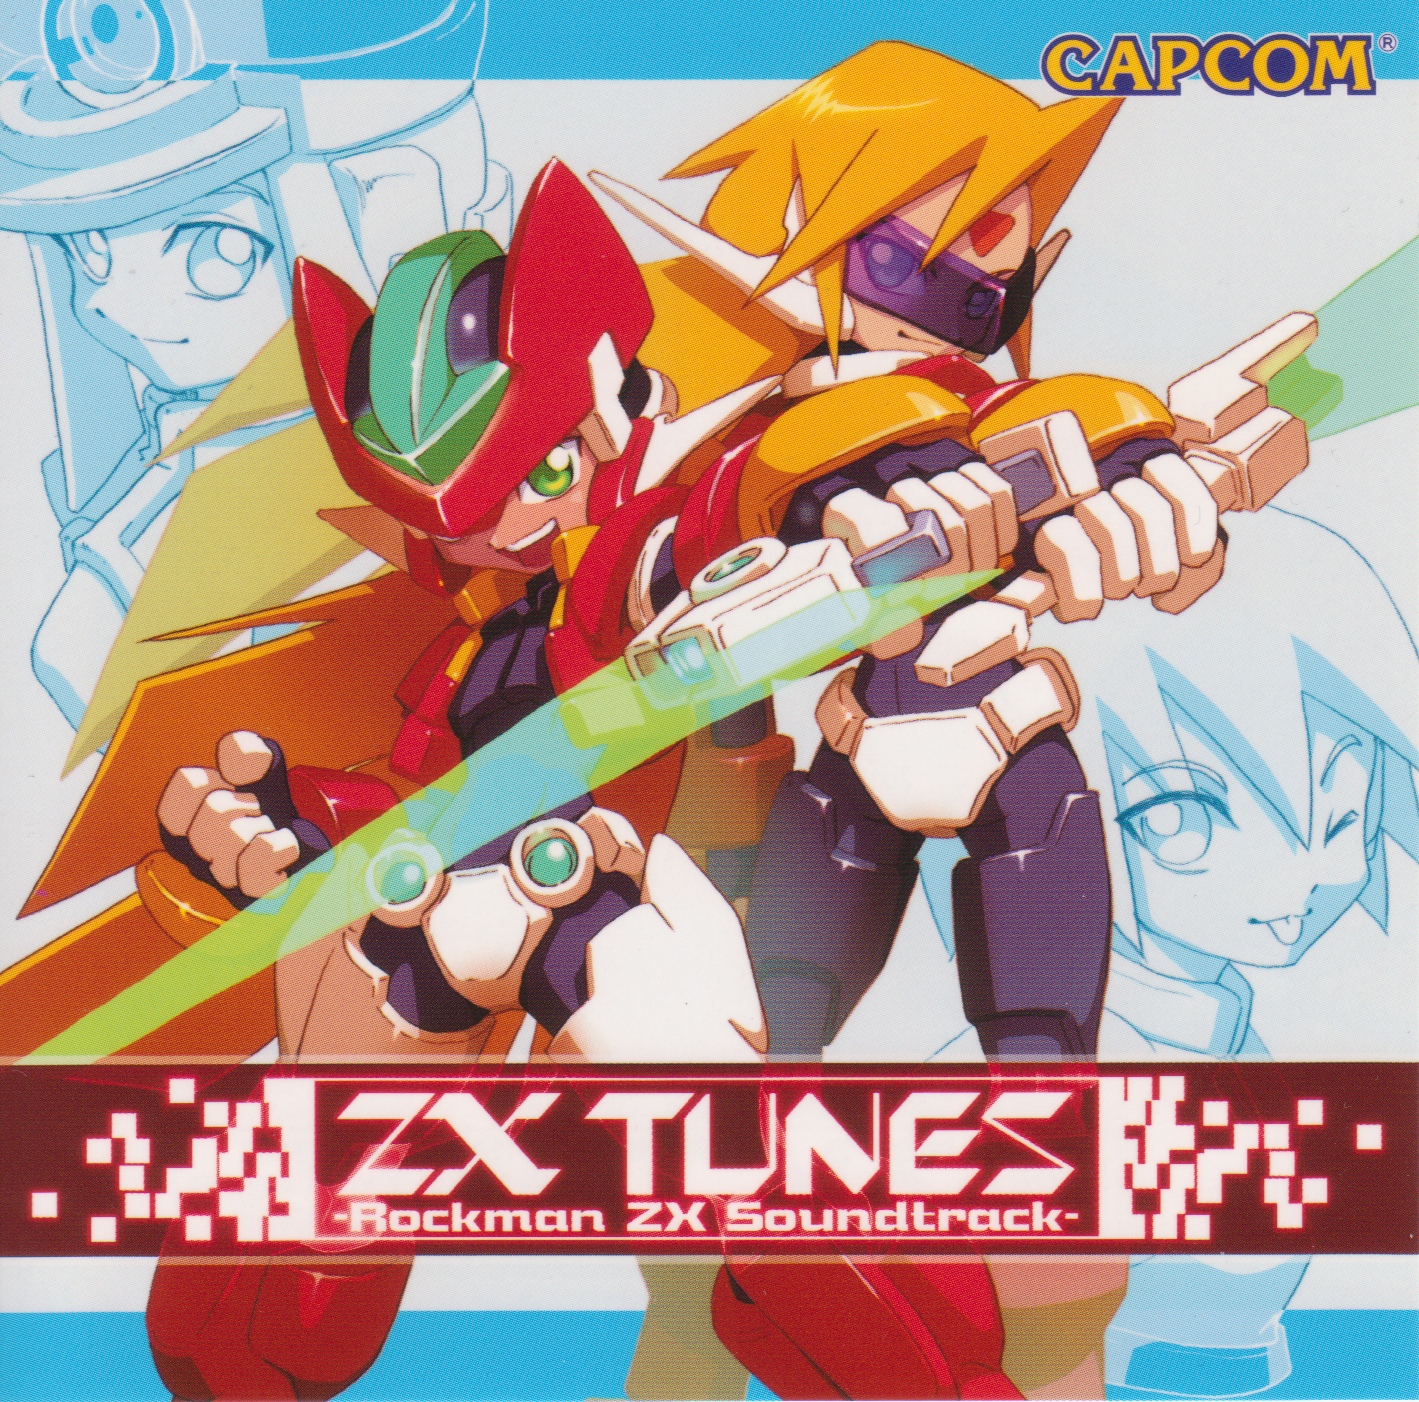 ZX Tunes Cover Cavalcade | The Reploid Research Lavatory - So help 